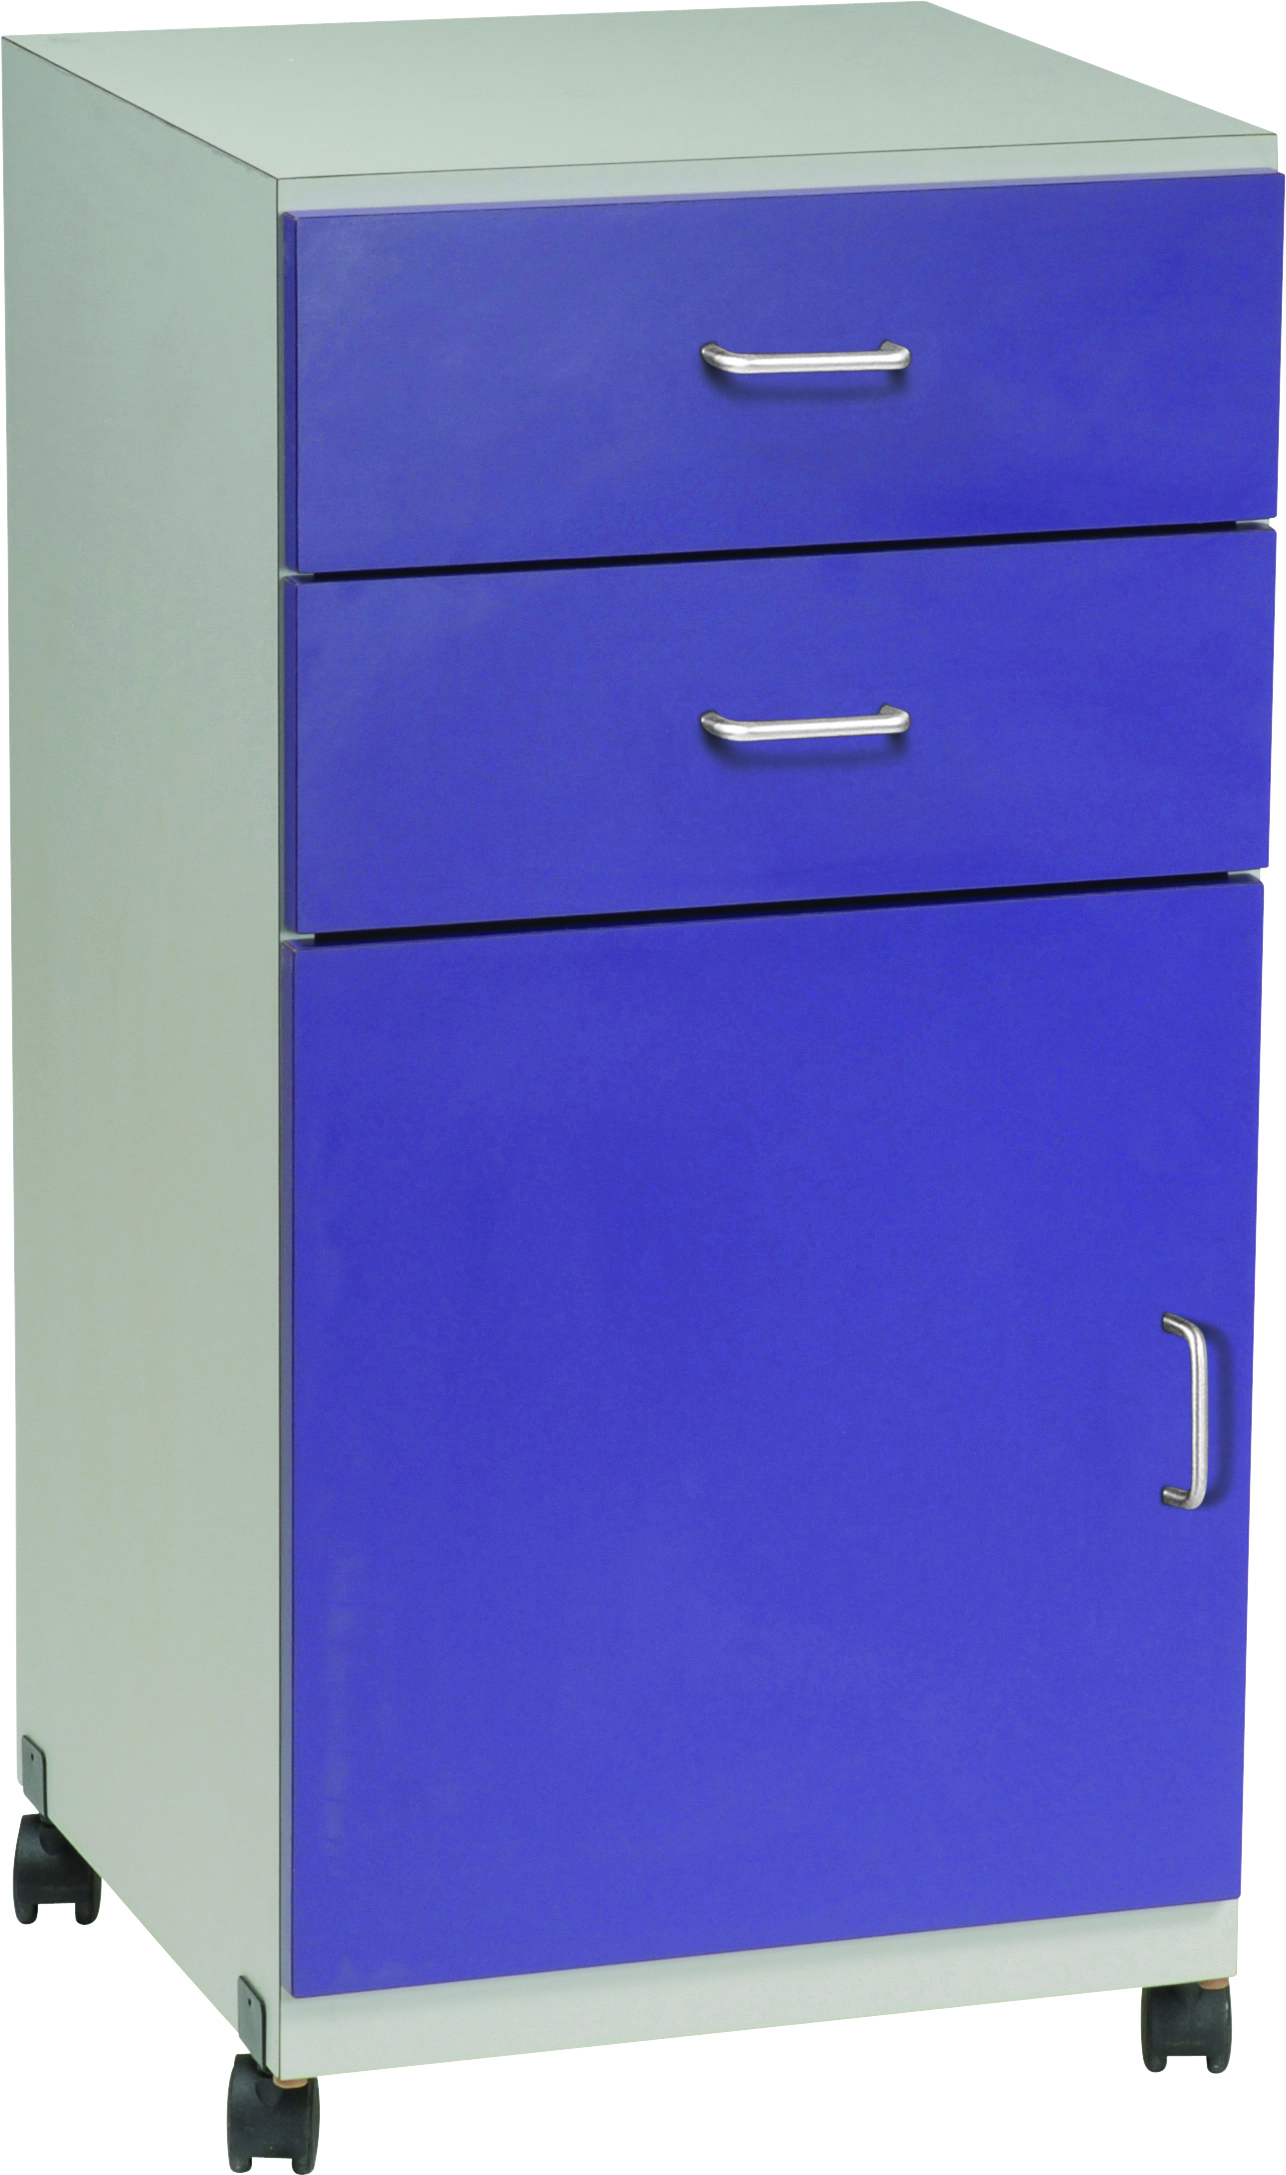 EX2D Series Express Cabinet express supply cabinet, express cabinet.